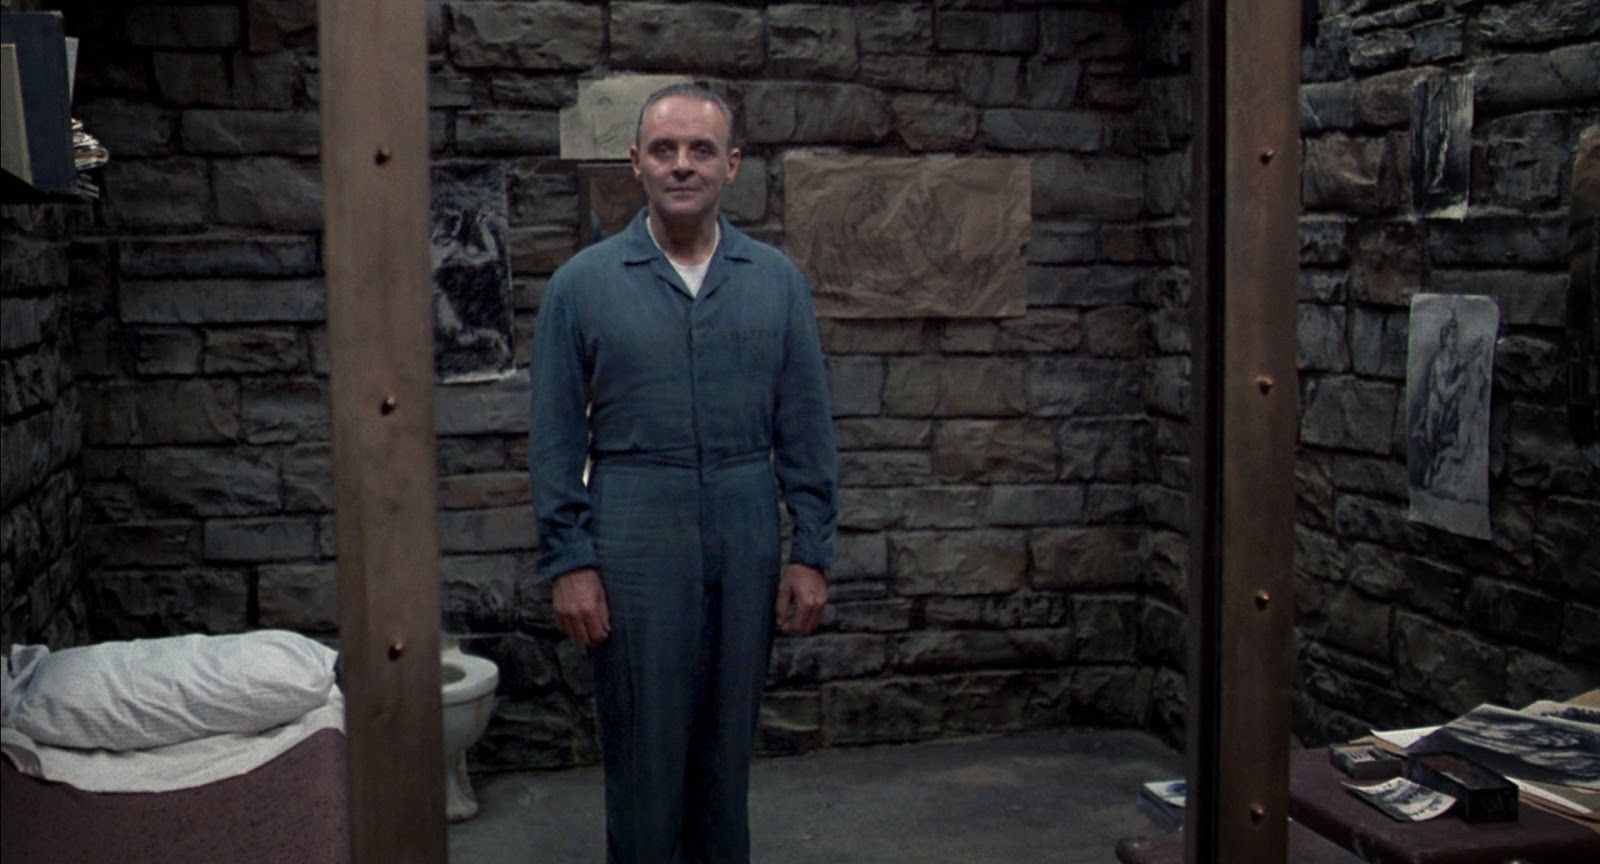 Anthony Hopkins in The Silence of the Lambs.